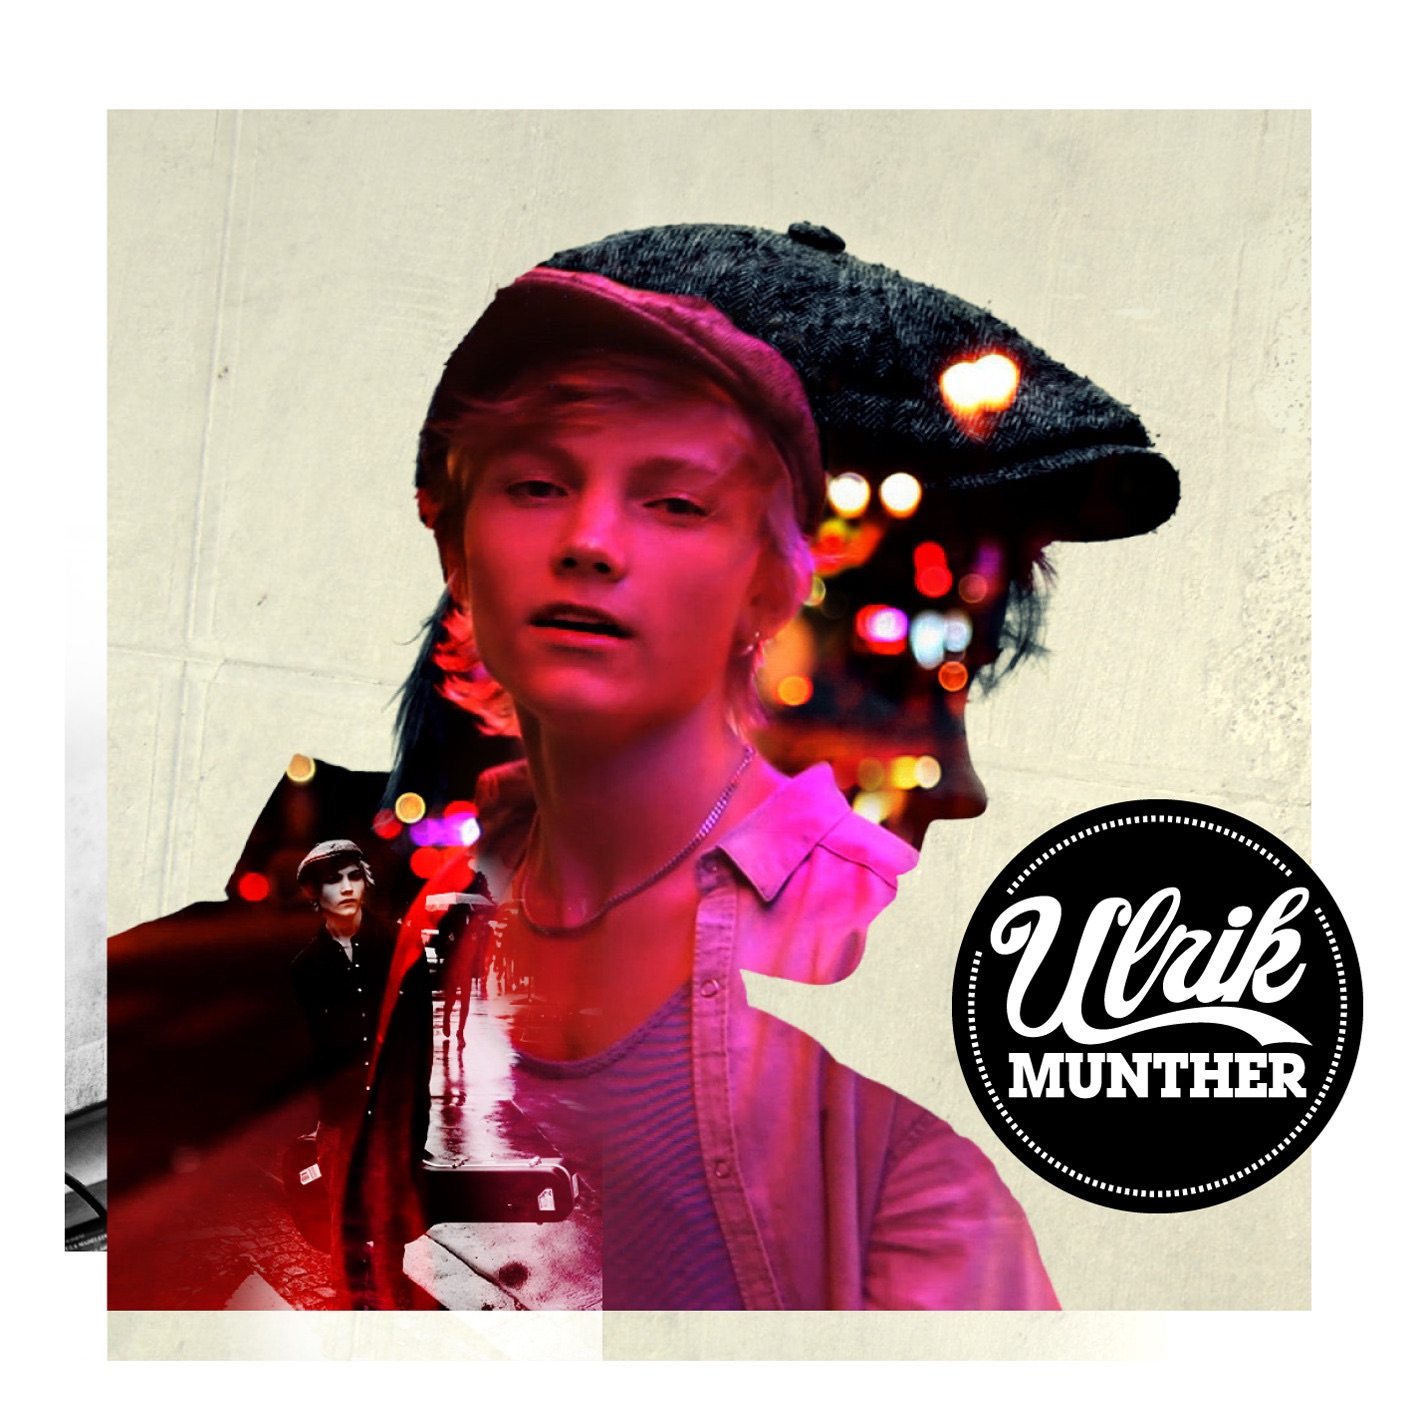 Ulrik Munther — Heroes in Defeat (Change Your Mind) cover artwork